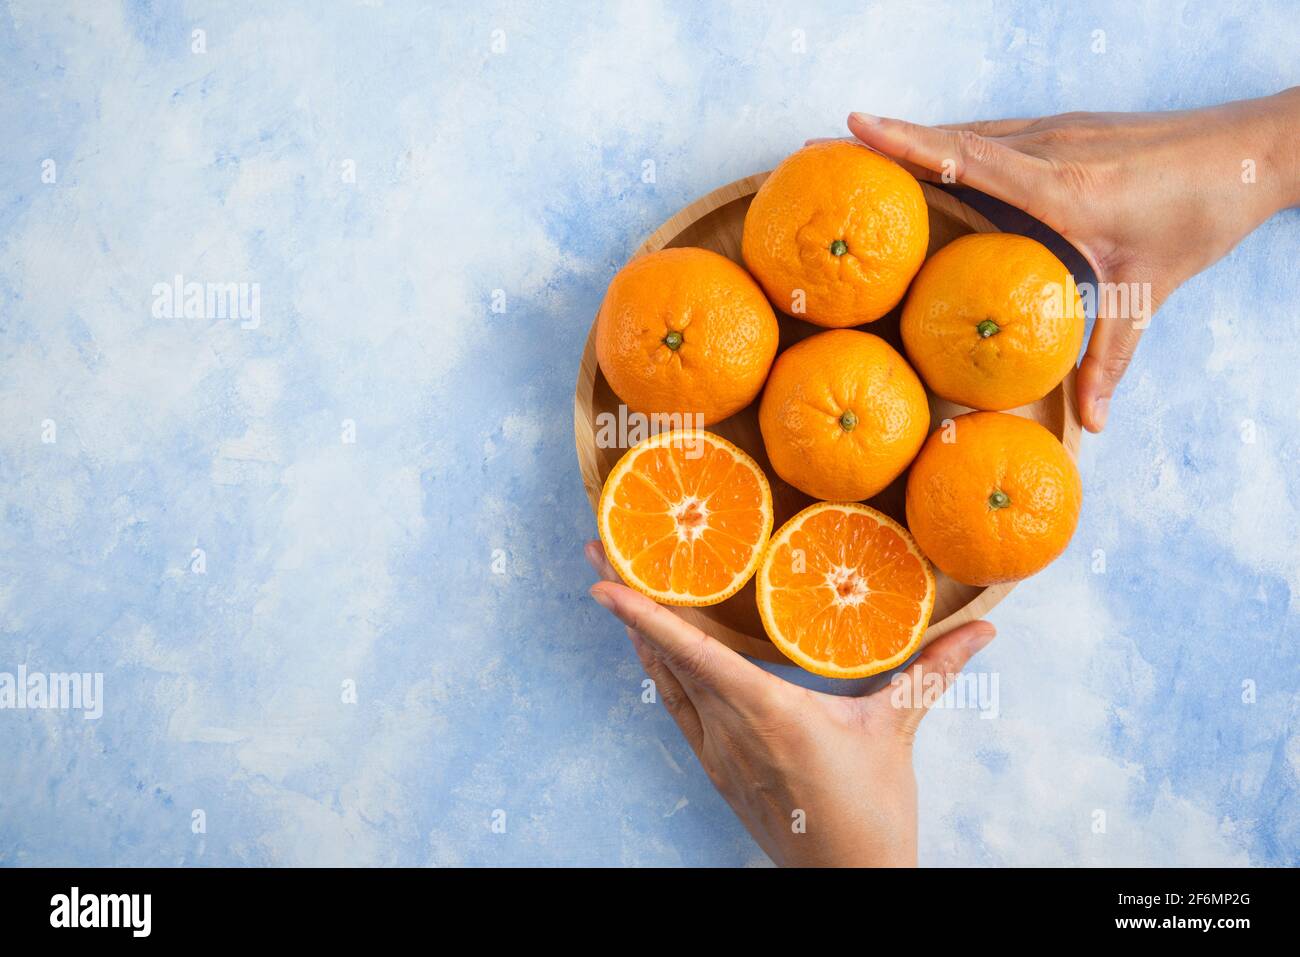 Female hand taking slice from pile. Clementine mandarins on blue background Stock Photo